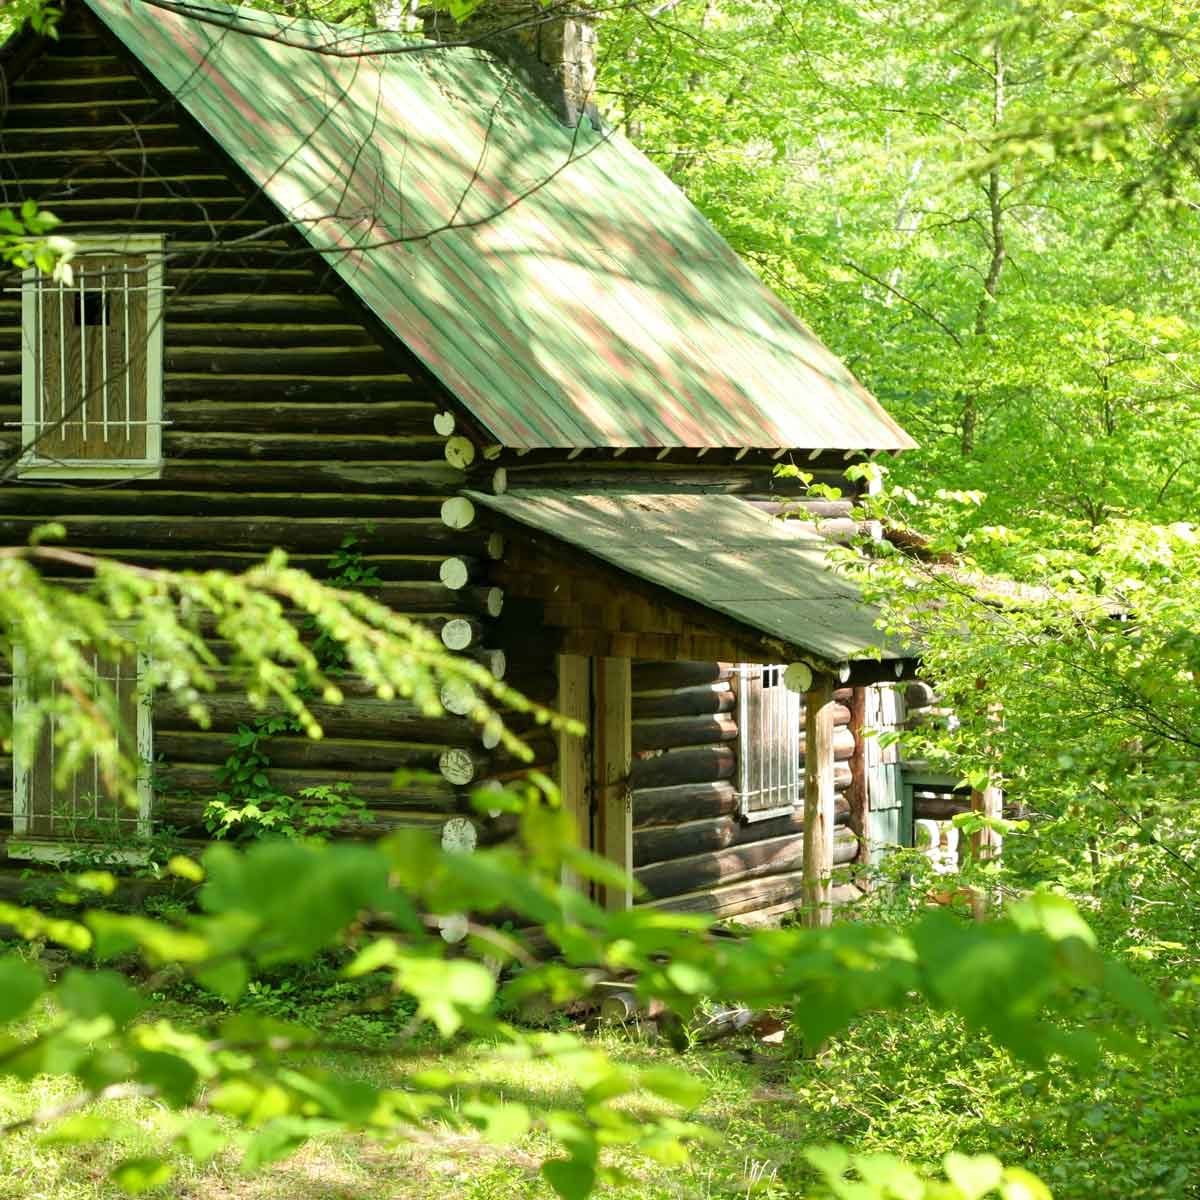 Here's How to Get Your Cabin Ready for Summer